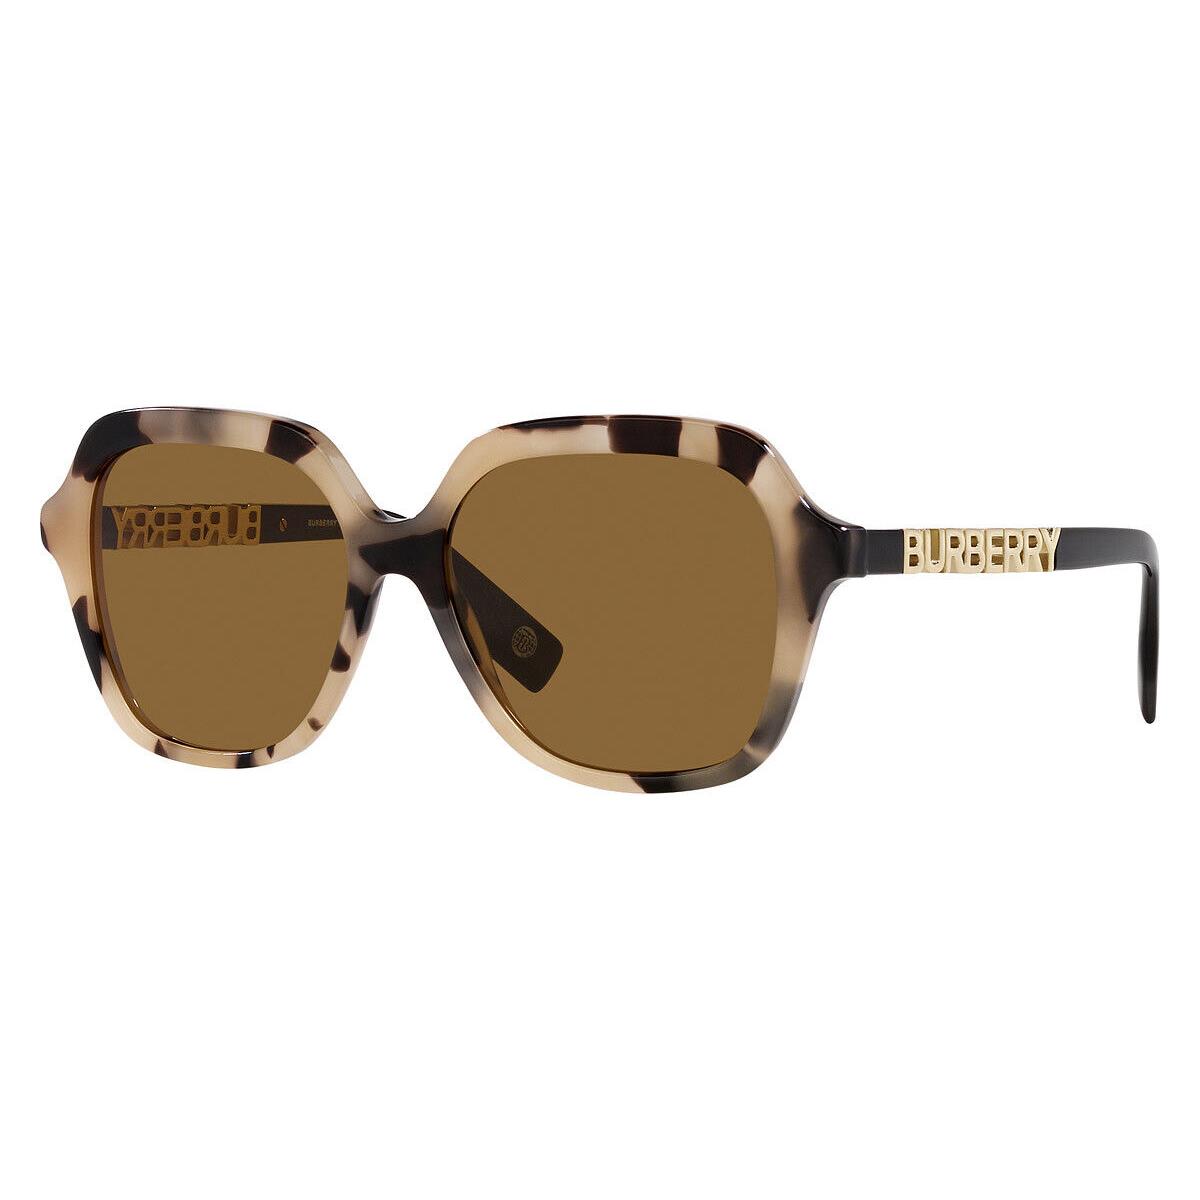 Burberry Joni BE4389 Sunglasses Spotted Horn Beige Bronze 55 - Frame: Spotted Horn and Beige / Bronze, Lens: